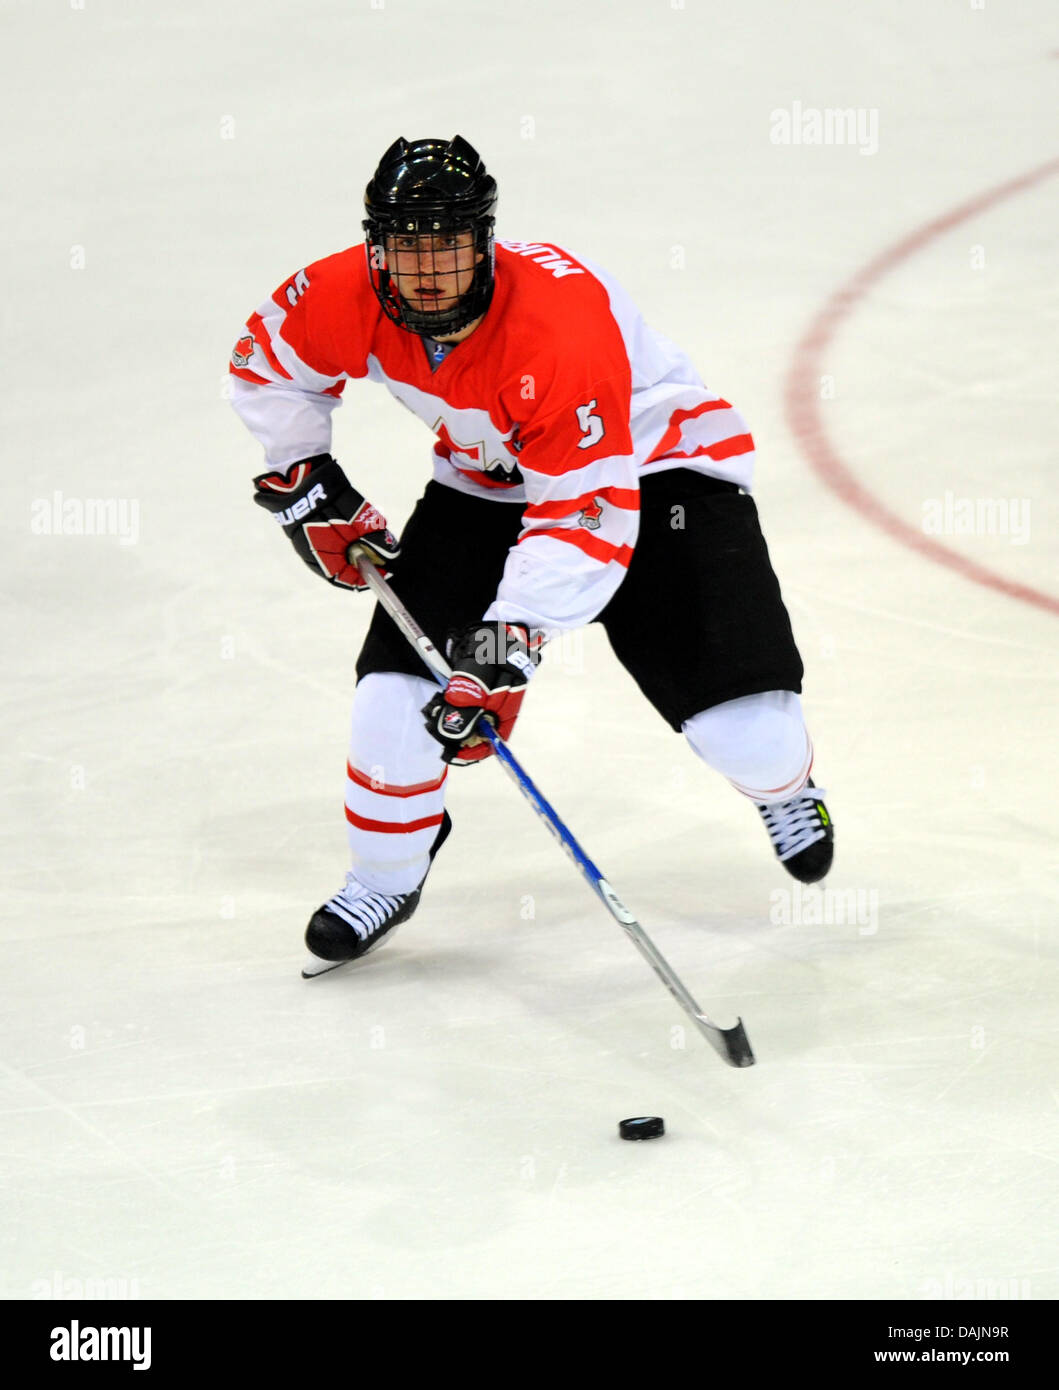 Canada's Ryan Murray is pictured during the IIHF U18 World Ice Hockey Championships at the EnergieVerbund Arena in Dresden, Germany, 15 April 2011. Photo: Thomas Eisenhuth Stock Photo